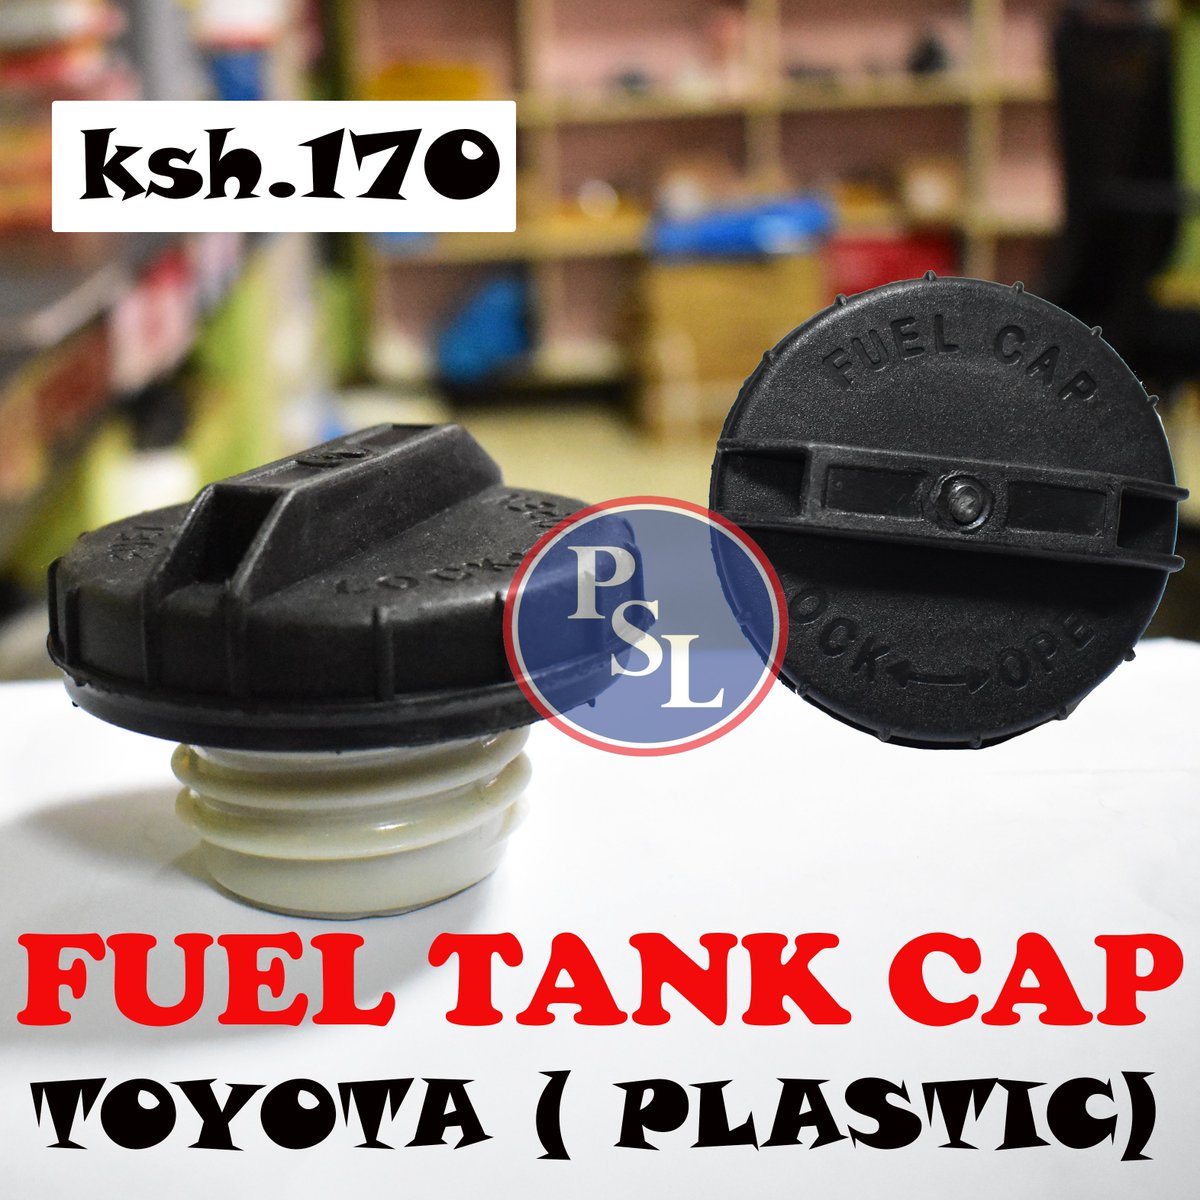 Reliable, affordable and built to last fuel tank cap for Toyota now available on offer at only ksh.170. Quality is our promise. #premiermotorspares #fuelcaps Koinange Twitter Nairobi Ombachi #prostitucion Nanyuki Dangote Mediheal Visa Mutahi Ngunyi Babu Mogadishu Black friday